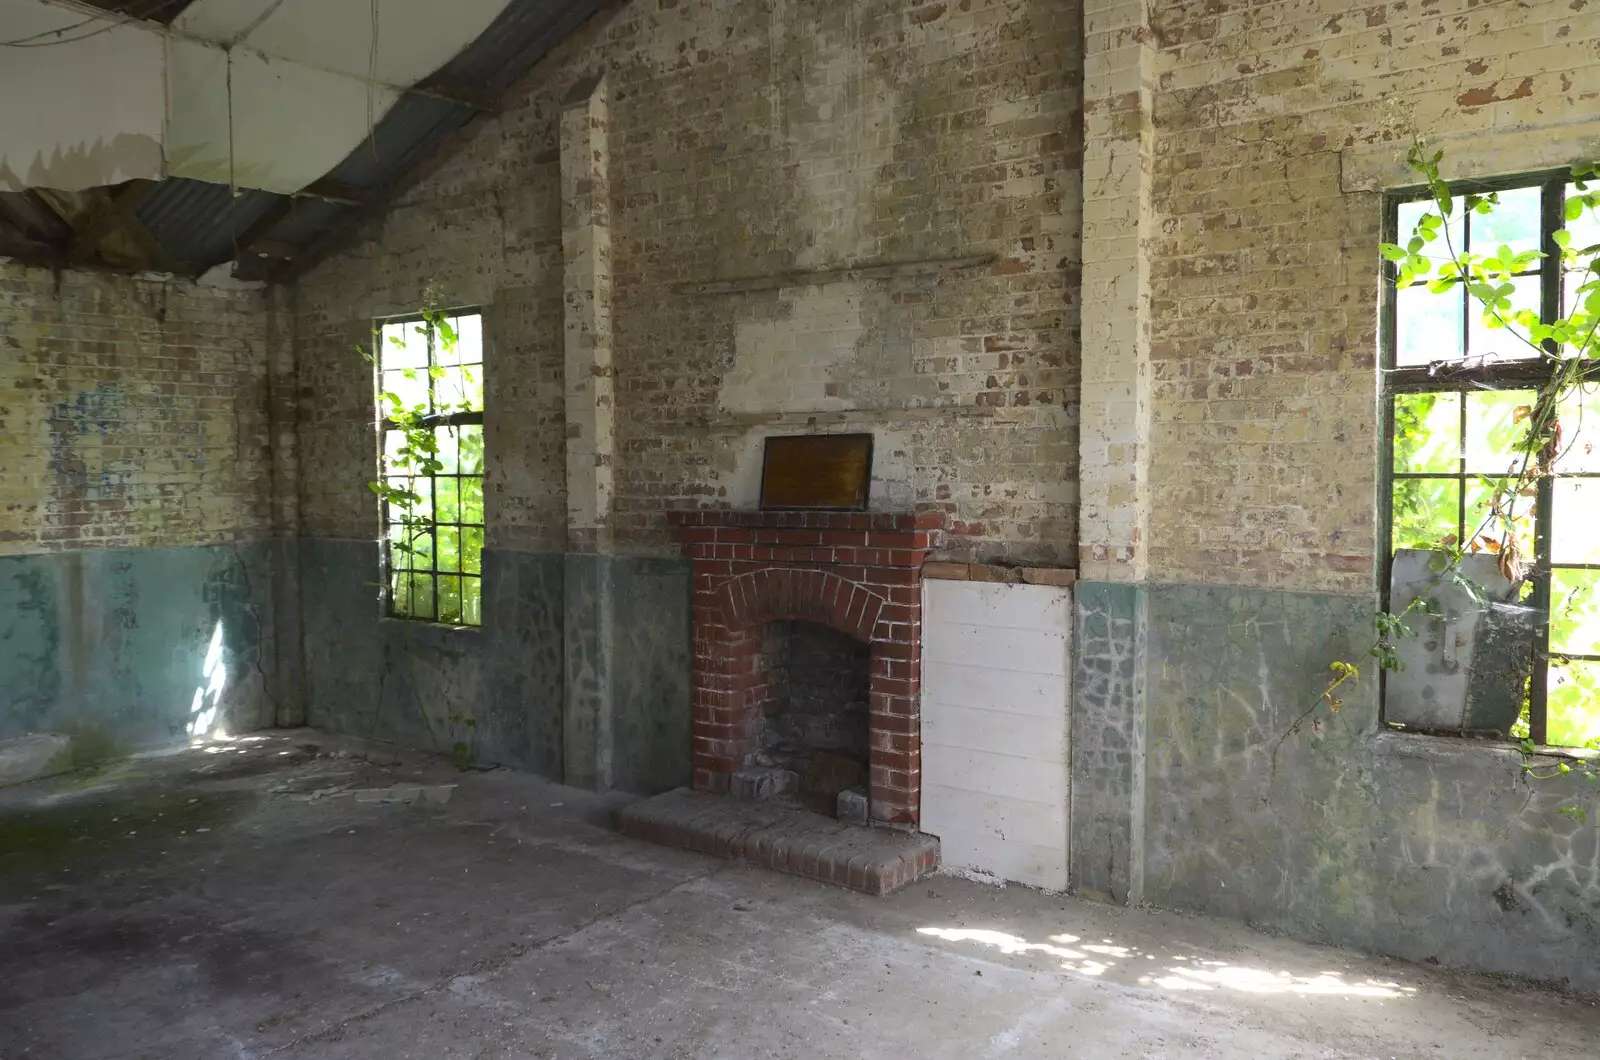 The 446th Bomb Group's 'Aero Club' room, from A 1940s Timewarp, Site 4, Bungay Airfield, Flixton, Suffolk - 9th June 2022